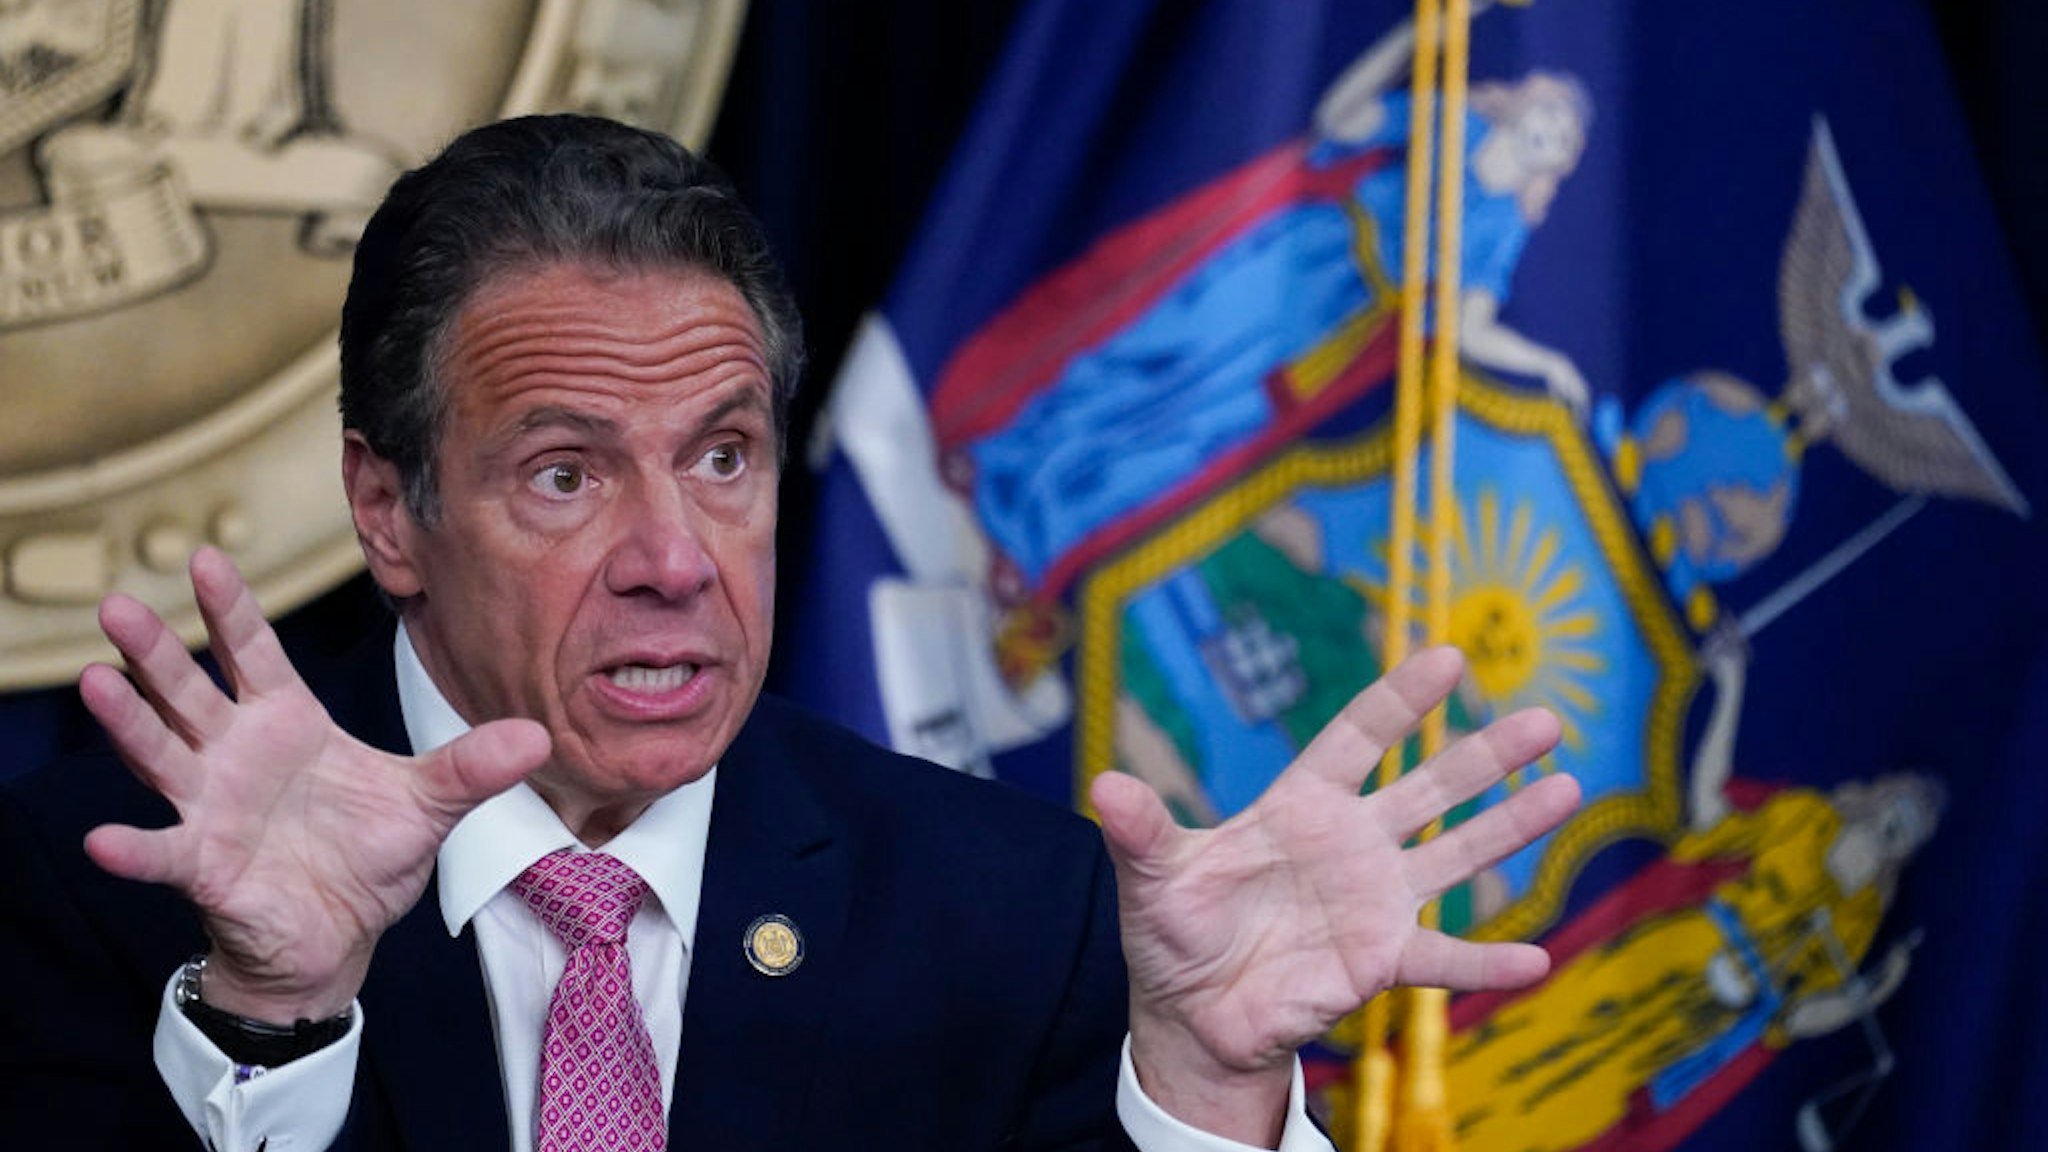 NEW YORK, NEW YORK - MAY 10: New York Gov. Andrew Cuomo speaks during a news conference on May 10, 2021 in New York City. It was announced that both SUNY and CUNY will require students to get COVID-19 vaccines before the next academic year. (Photo by Mary Altaffer-Pool/Getty Images)